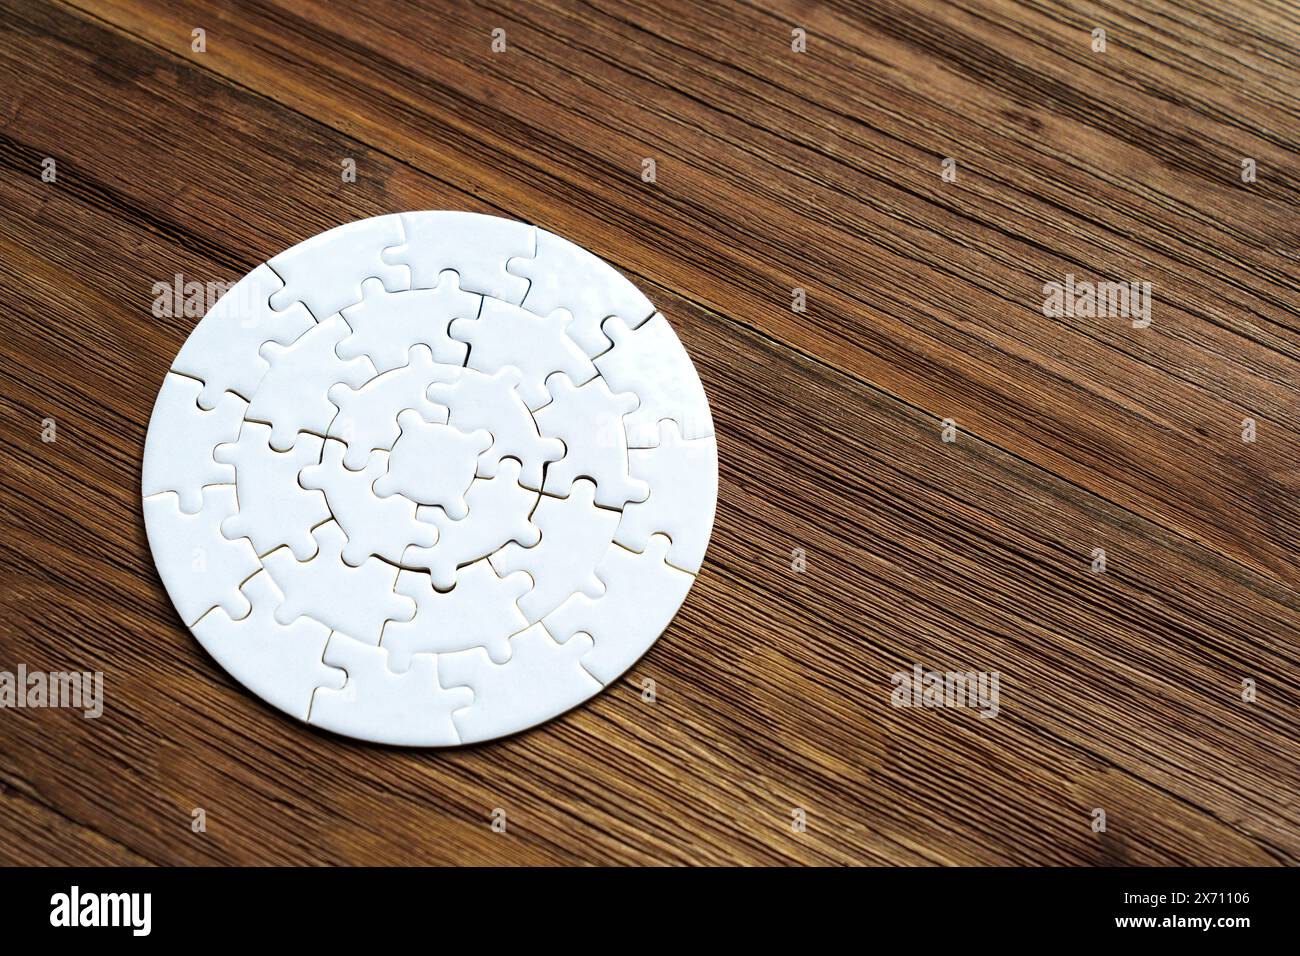 Close-up of a white circular jigsaw puzzle set on a wooden background with copy space. Creative time related concept. Stock Photo